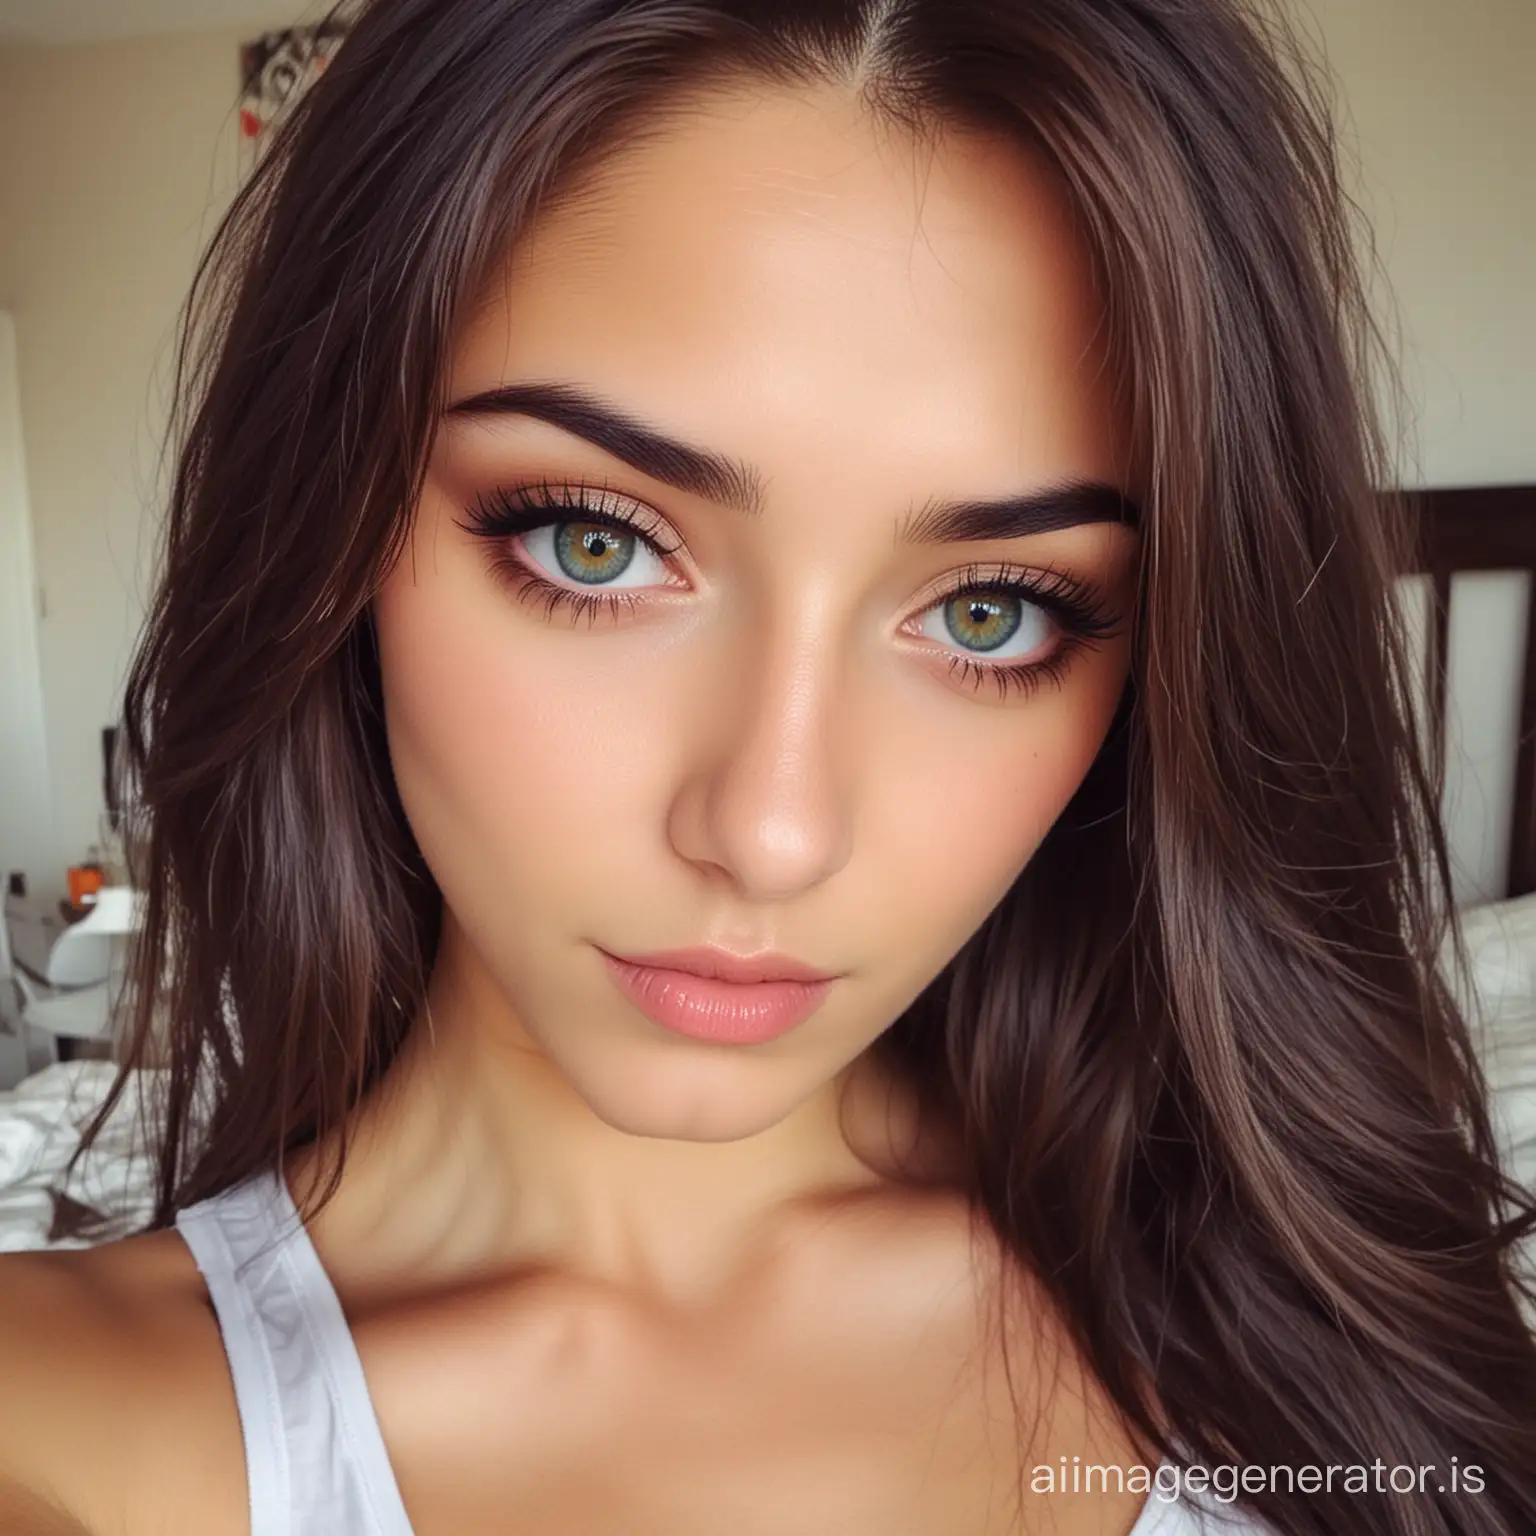 Beautiful Turkish girl with color eyes selfie at bedroom